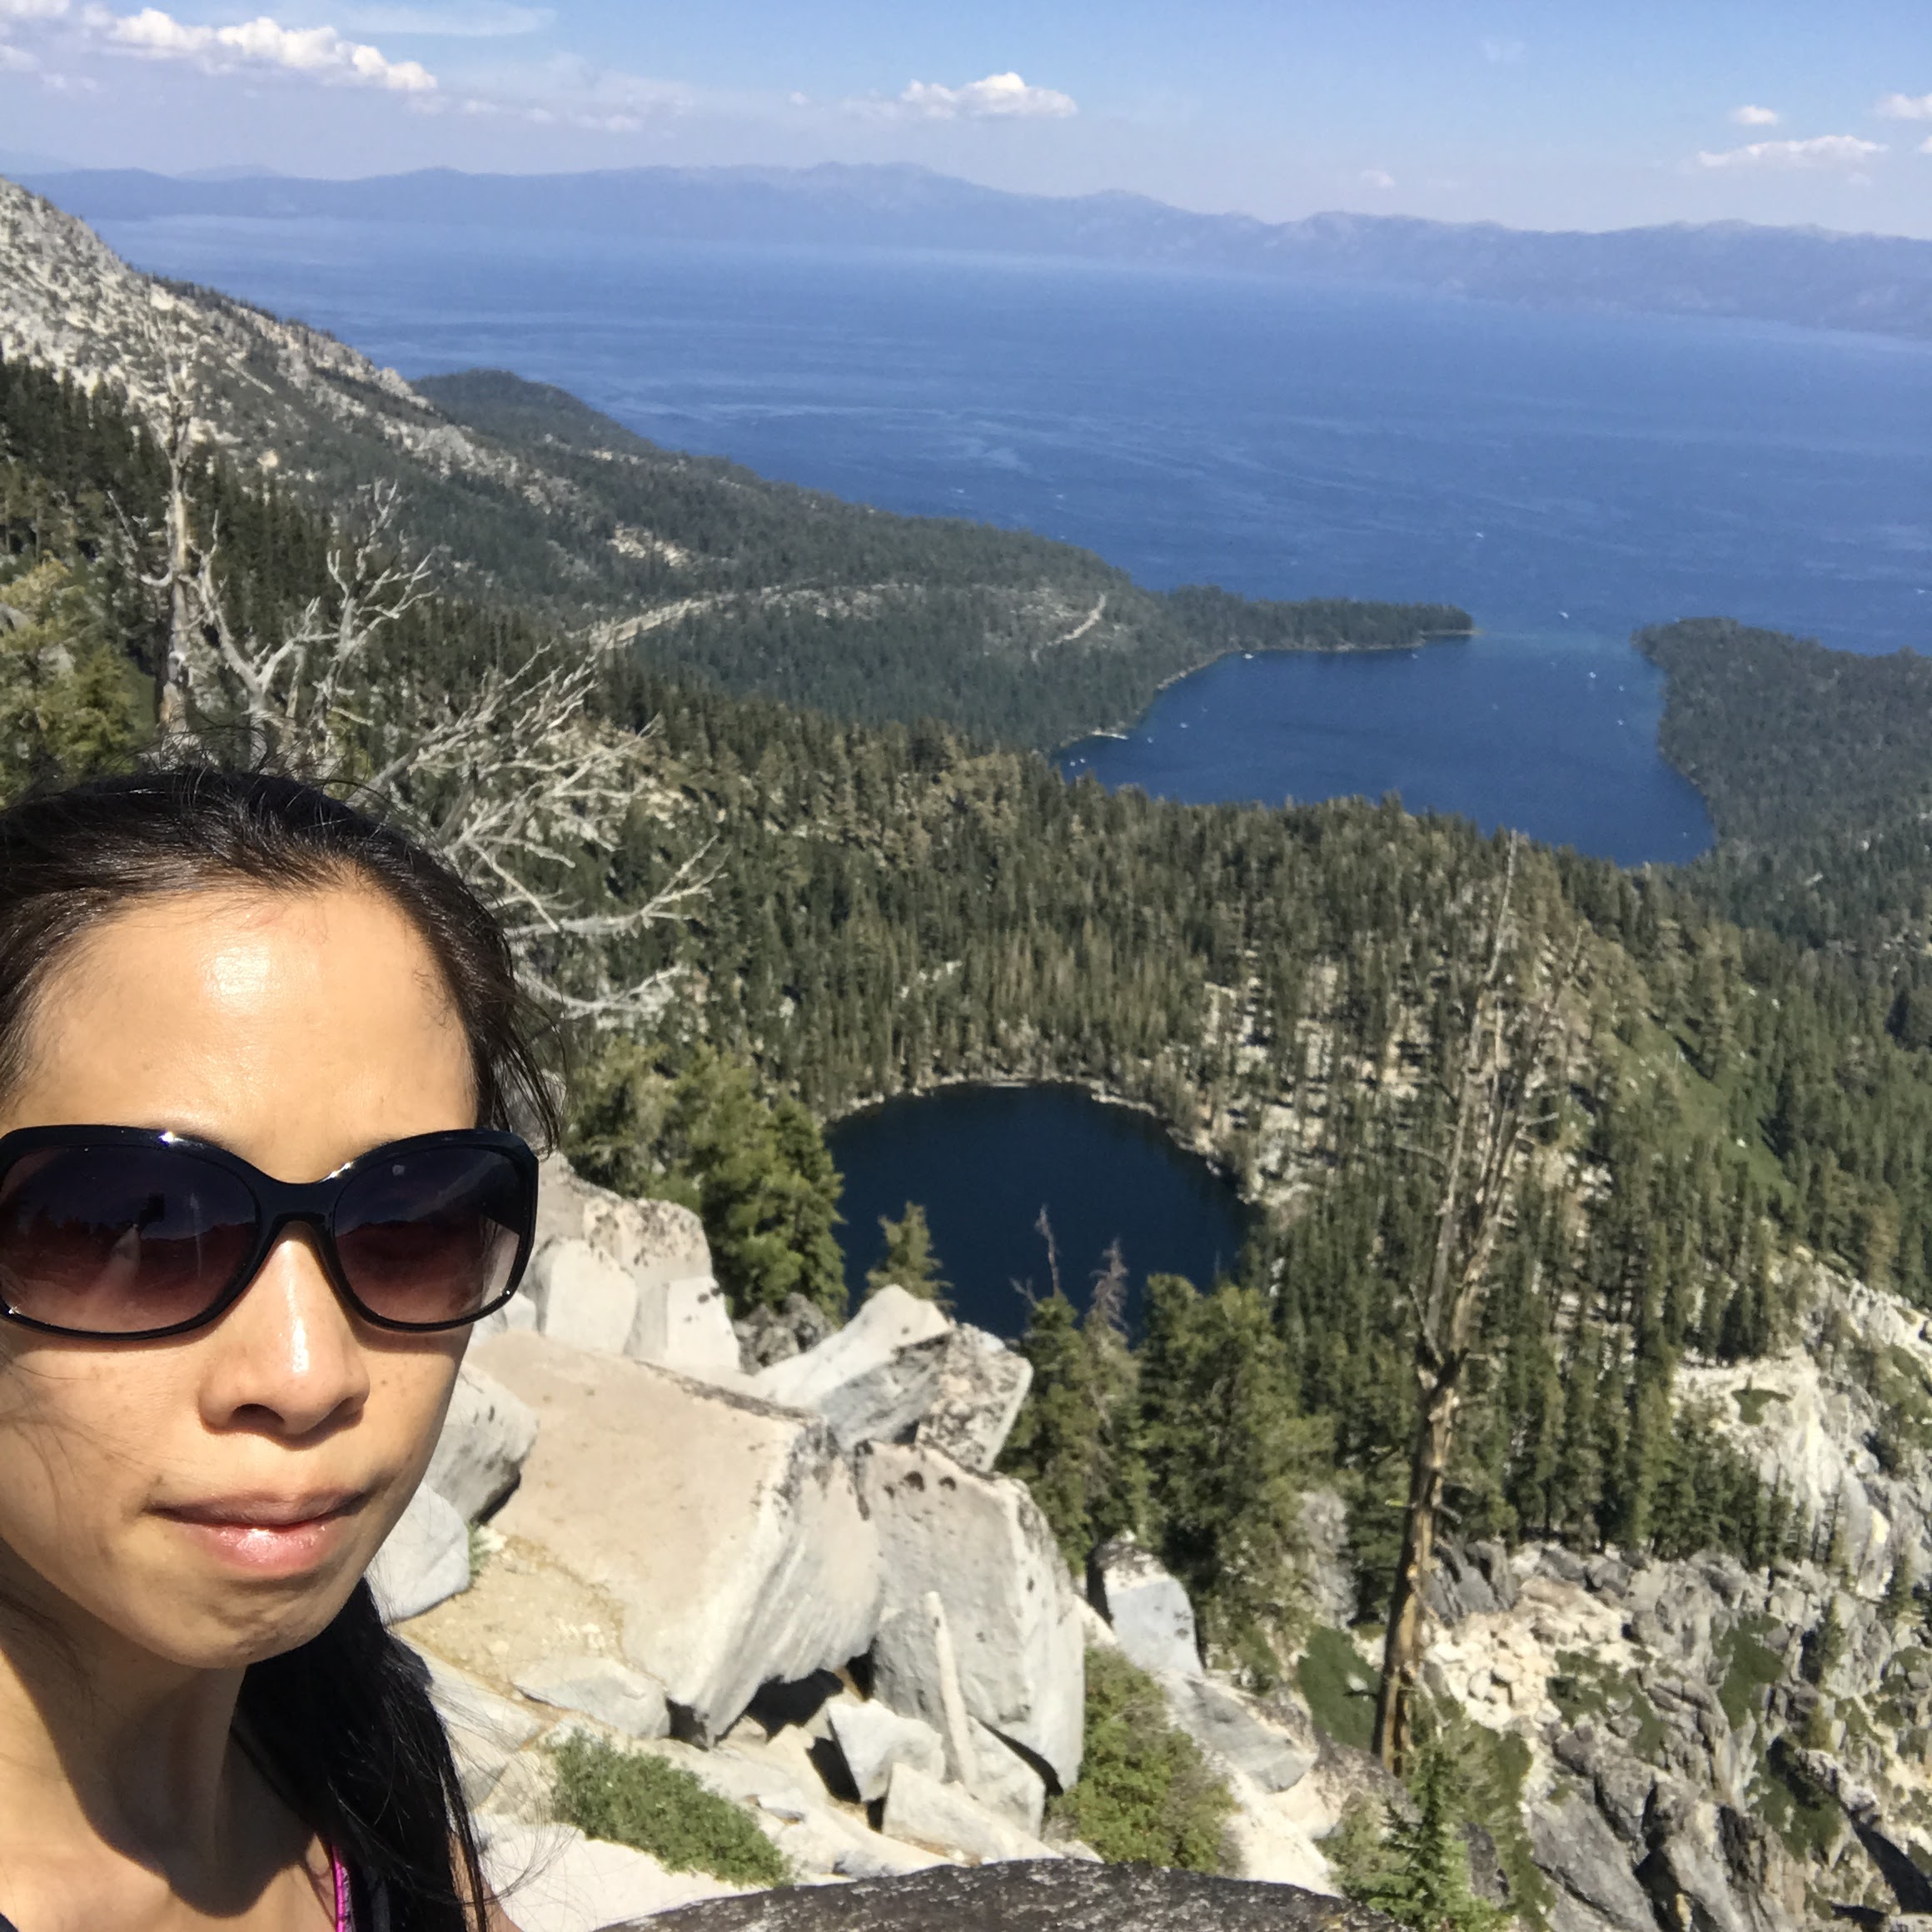 An attempt at a selfie with the lakes down below. 8/24/2017 Lake Tahoe